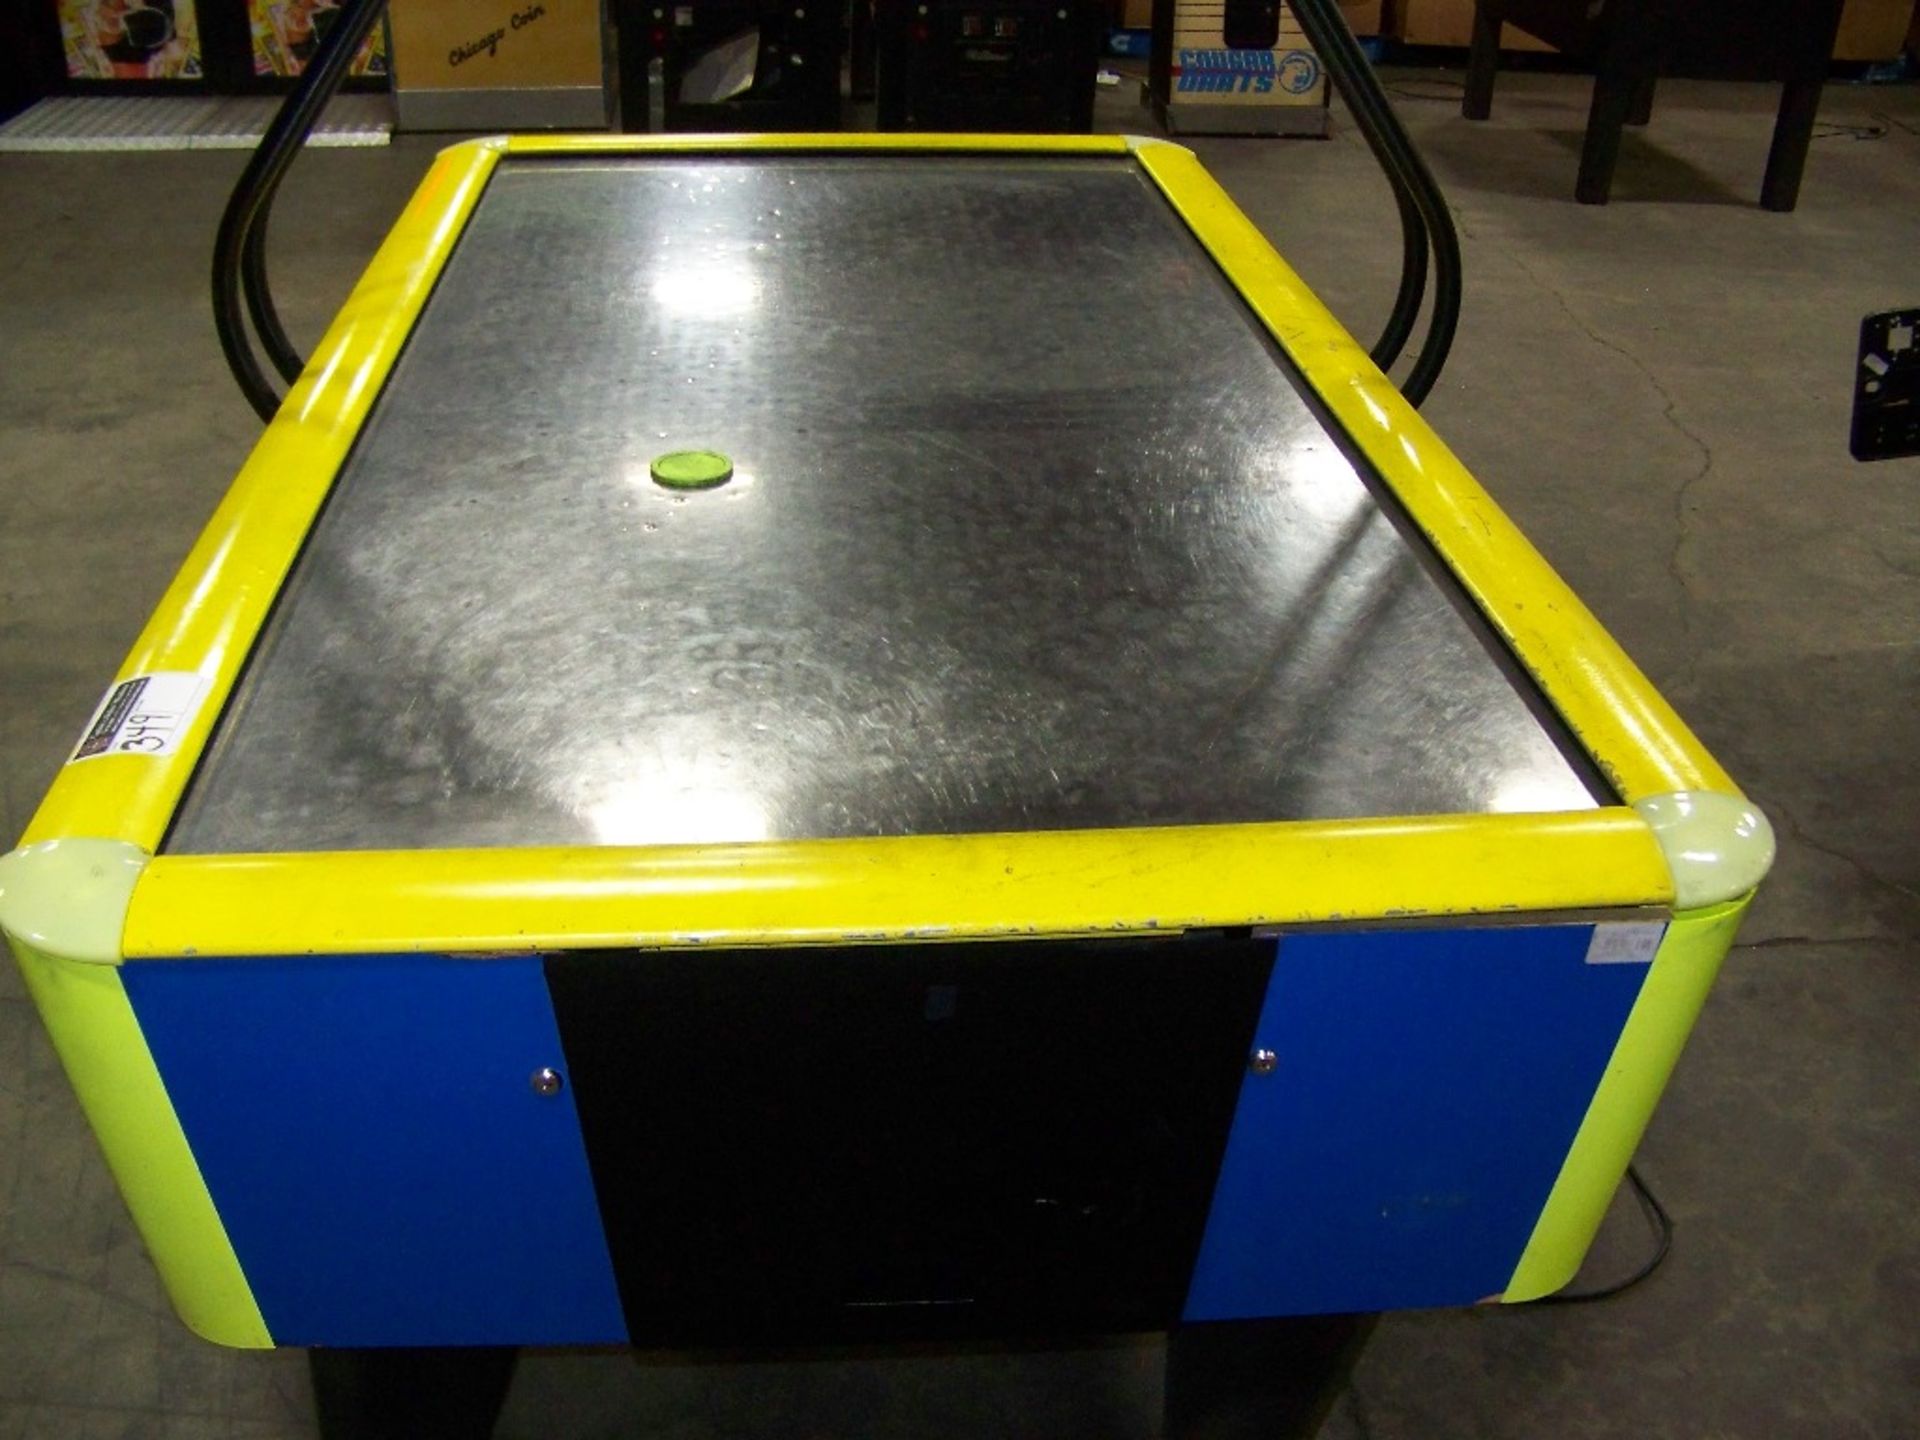 AIR HOCKEY FAST TRACK ICE WITH OVERHEAD SCORE - Image 4 of 5